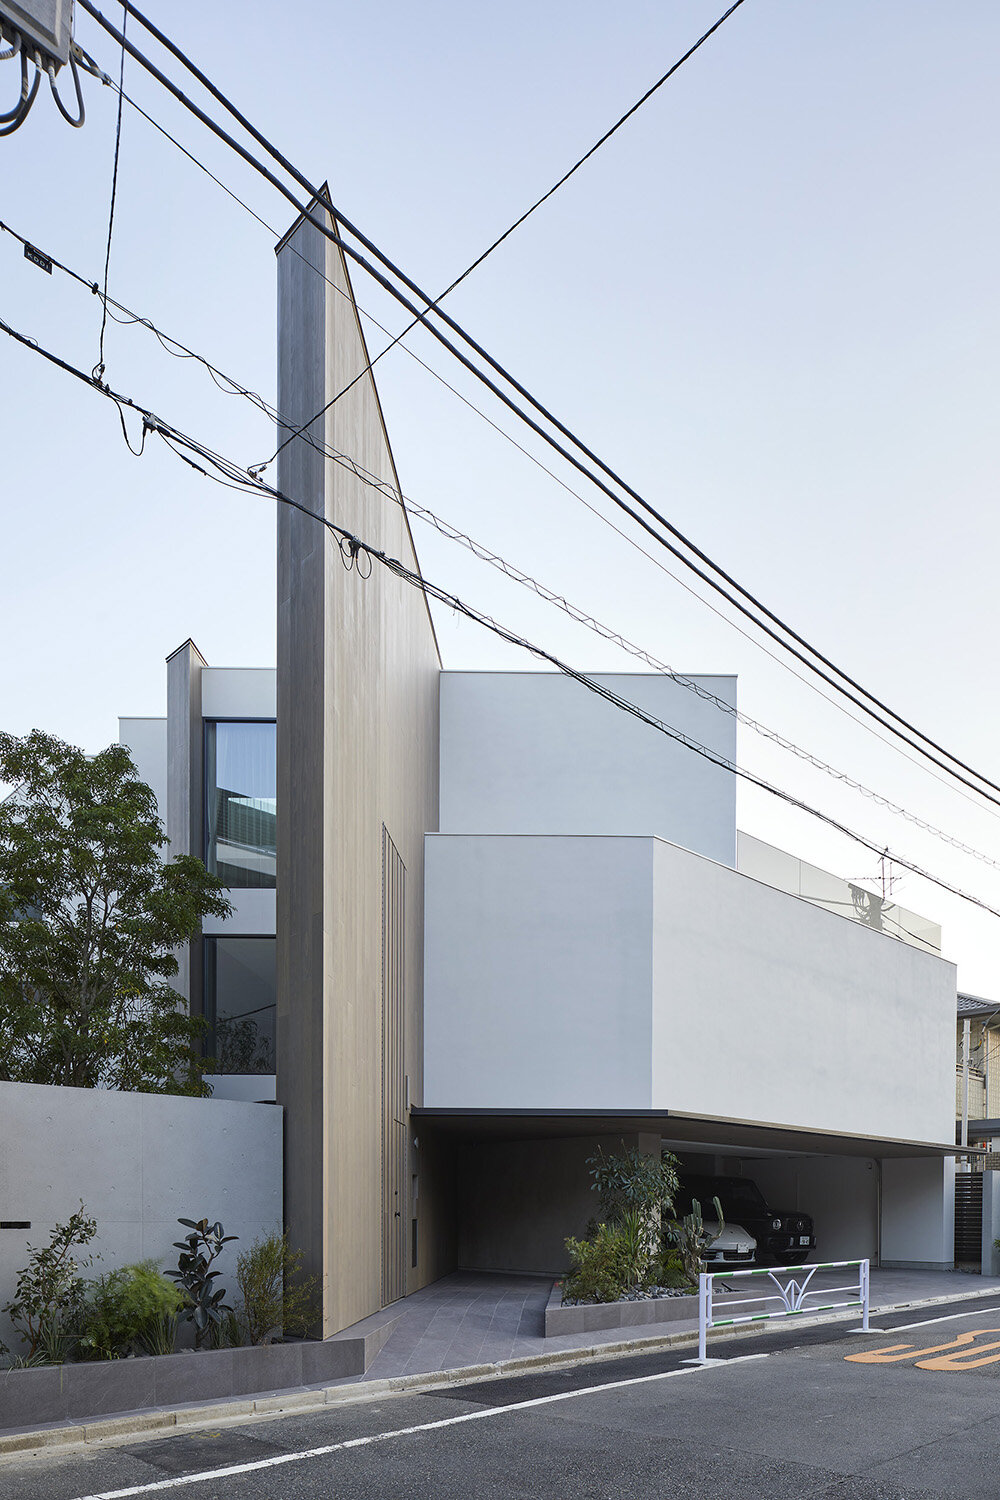  Exterior design of ‘Shoto S’, a residence designed by Japanese architecture design studio SINATO led by Chikara Ono, in Shibuya, Tokyo. 